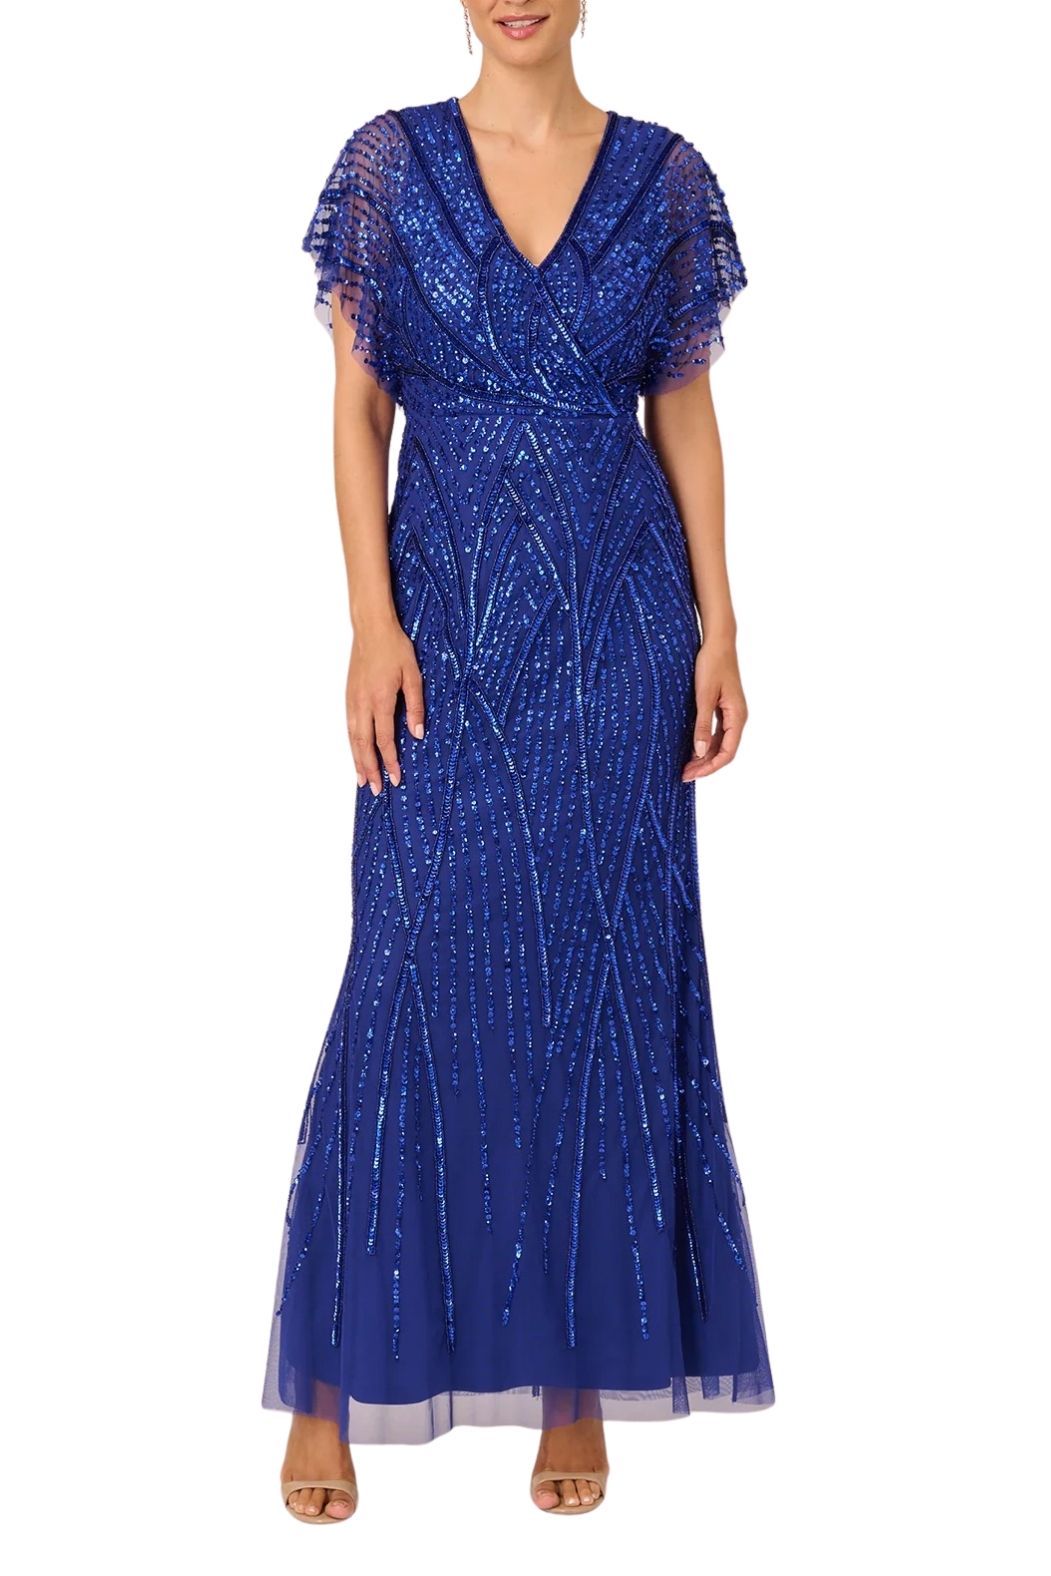 Adrianna Papell Mermaid with Dolman Sleeves Petite Gown